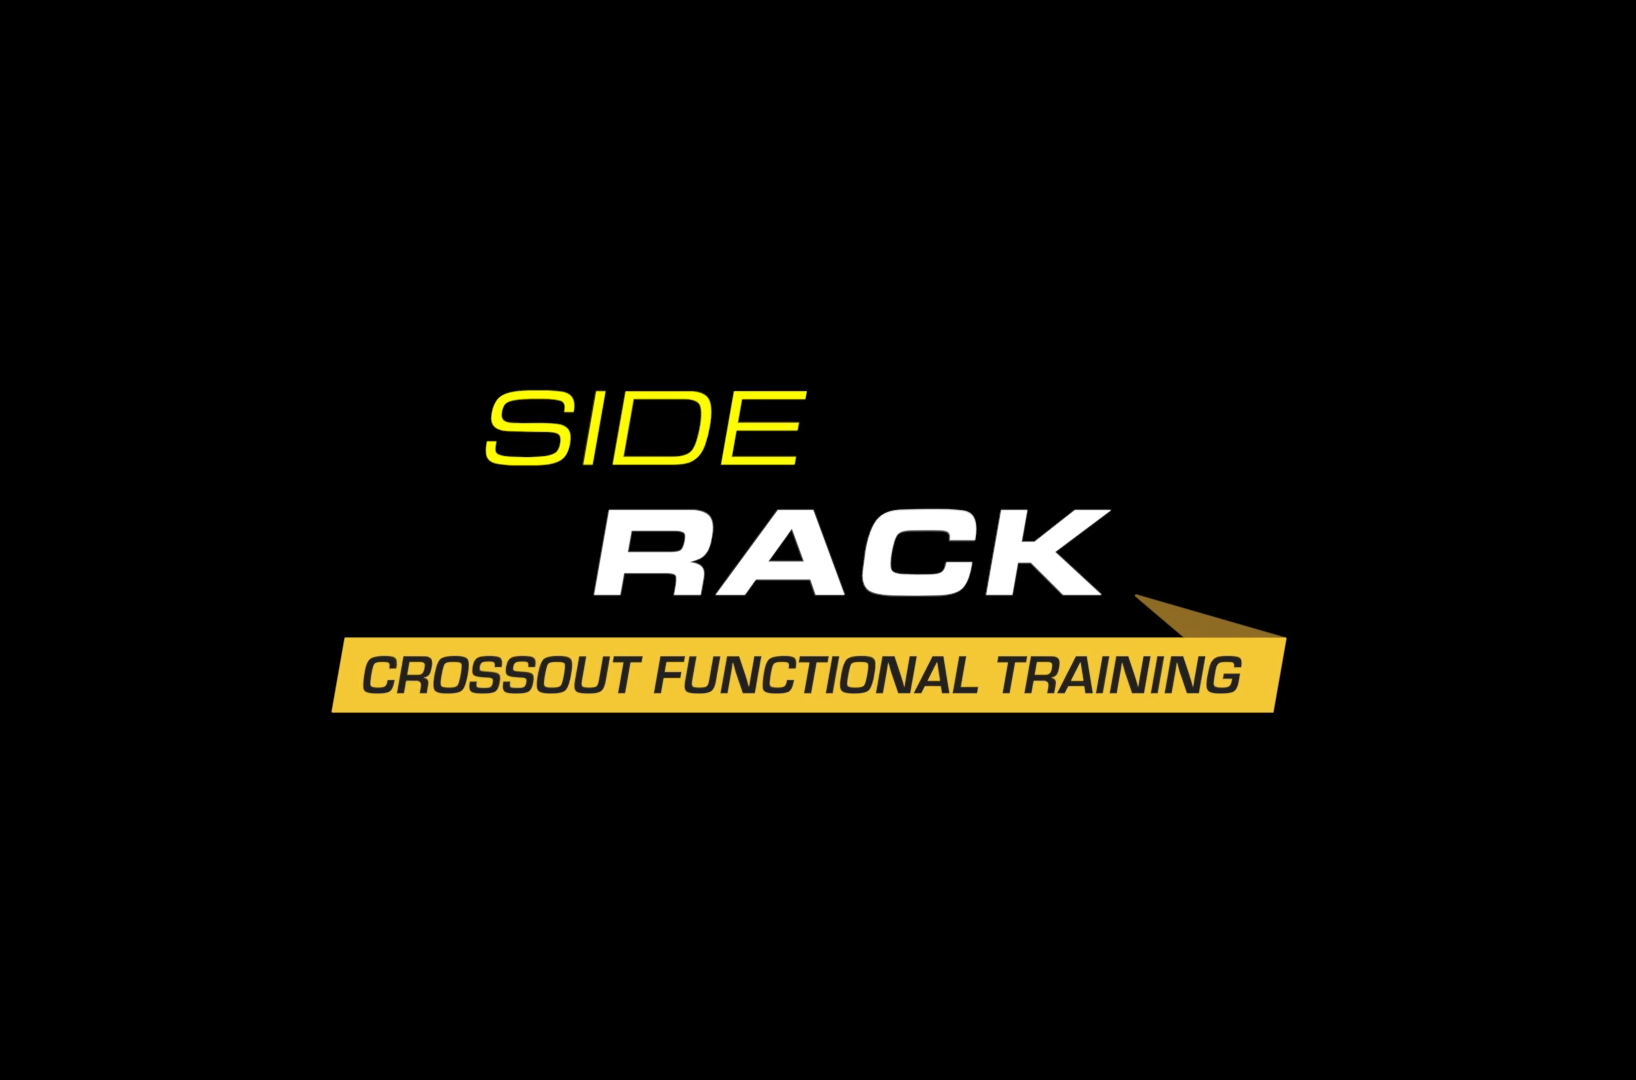 Side Rack Crossout Functional Training